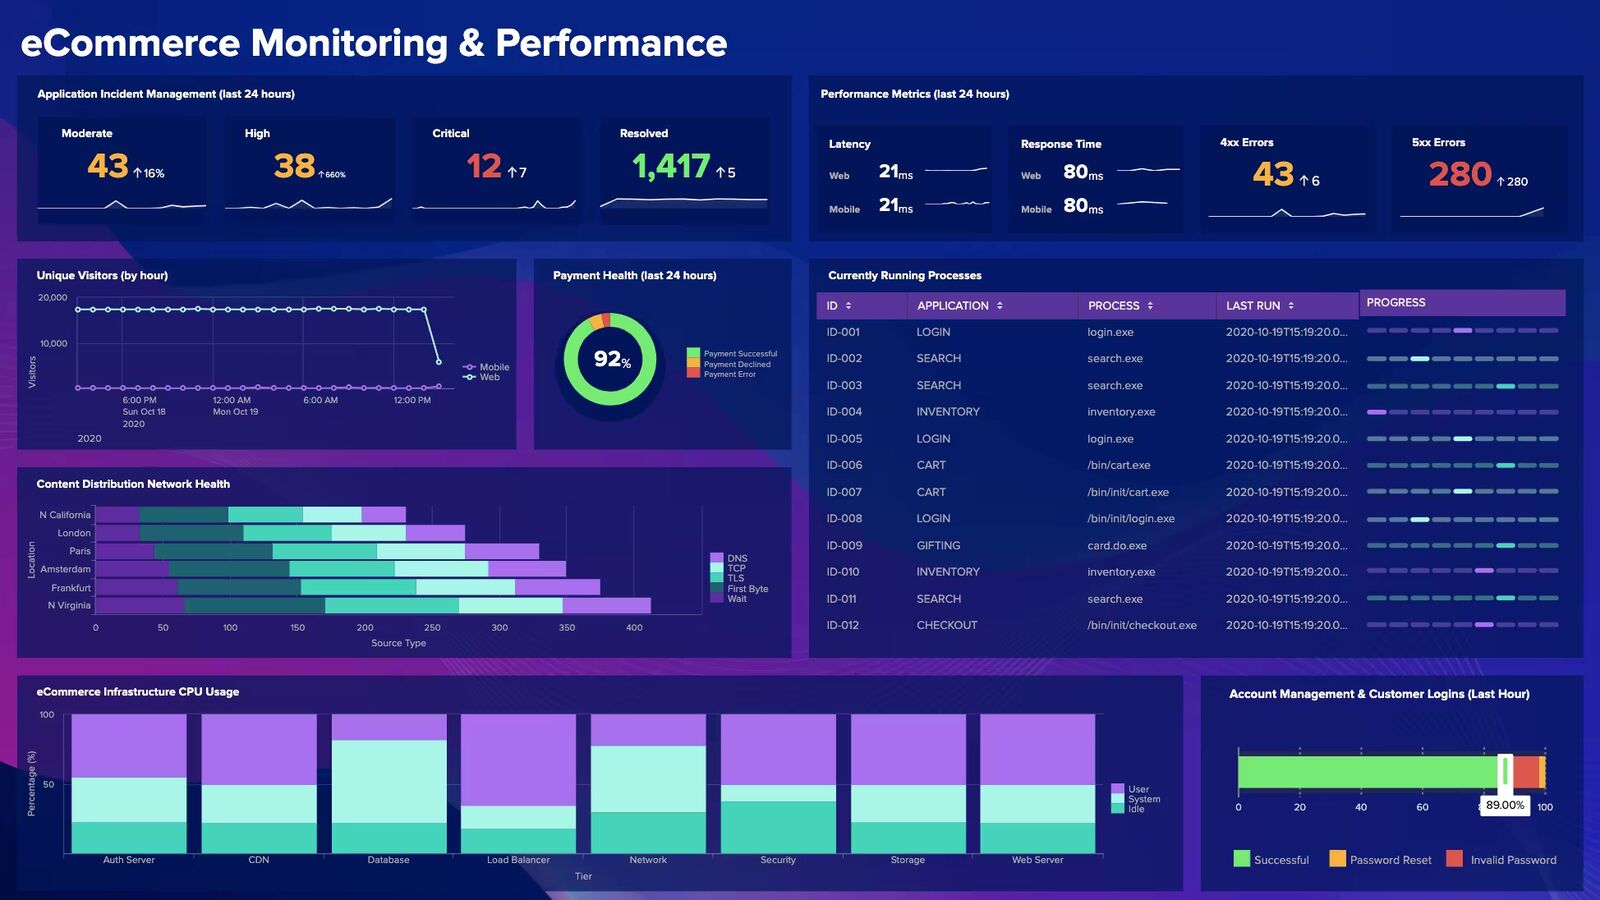 Splunk eCommerce Monitoring and Performance Dashboard